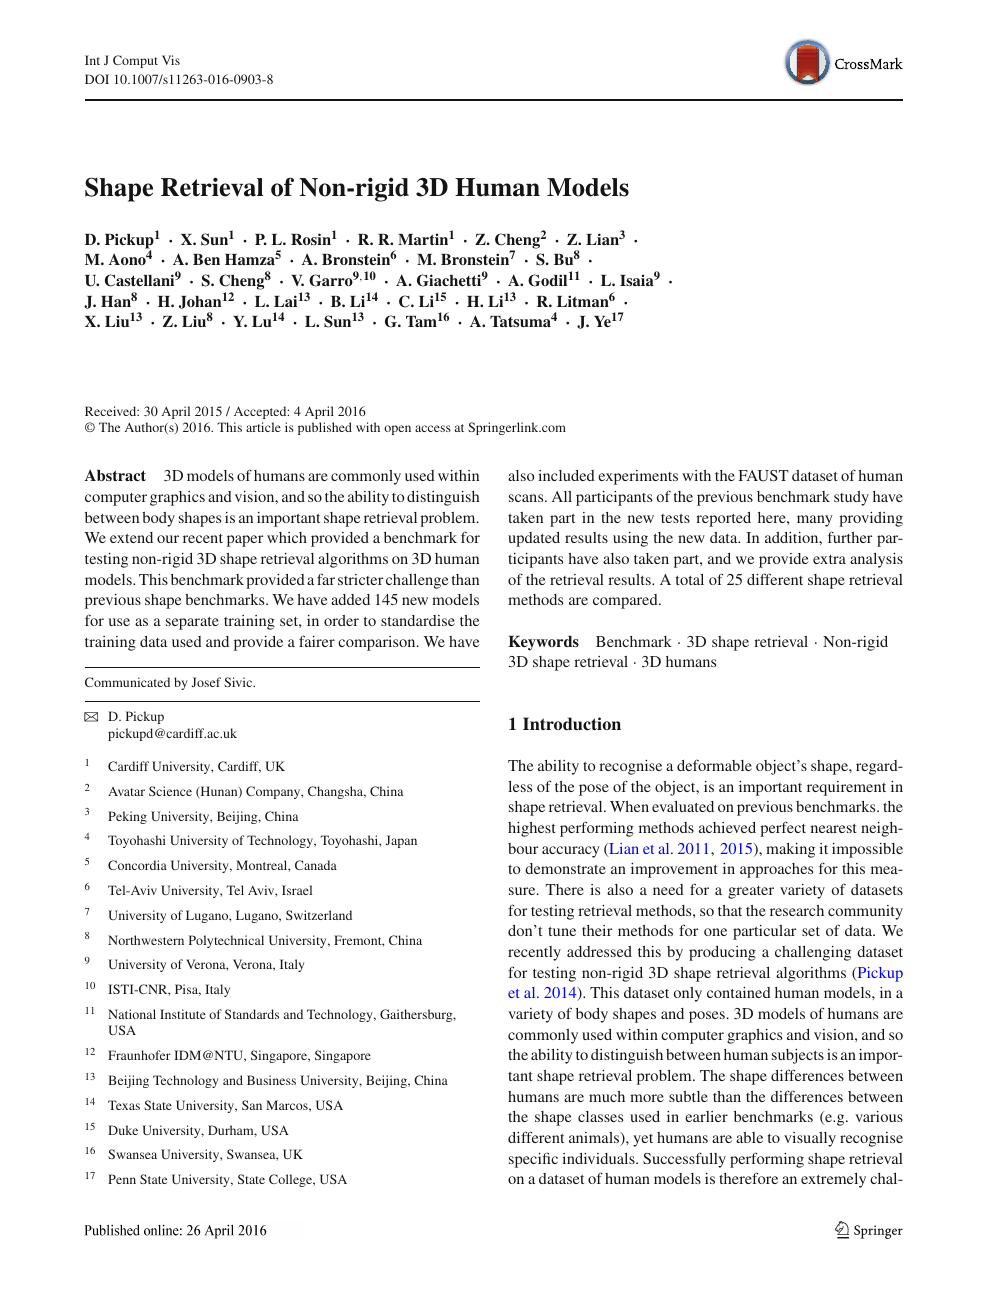 Shape Retrieval Of Non Rigid 3d Human Models Topic Of Research Paper In Computer And Information Sciences Download Scholarly Article Pdf And Read For Free On Cyberleninka Open Science Hub